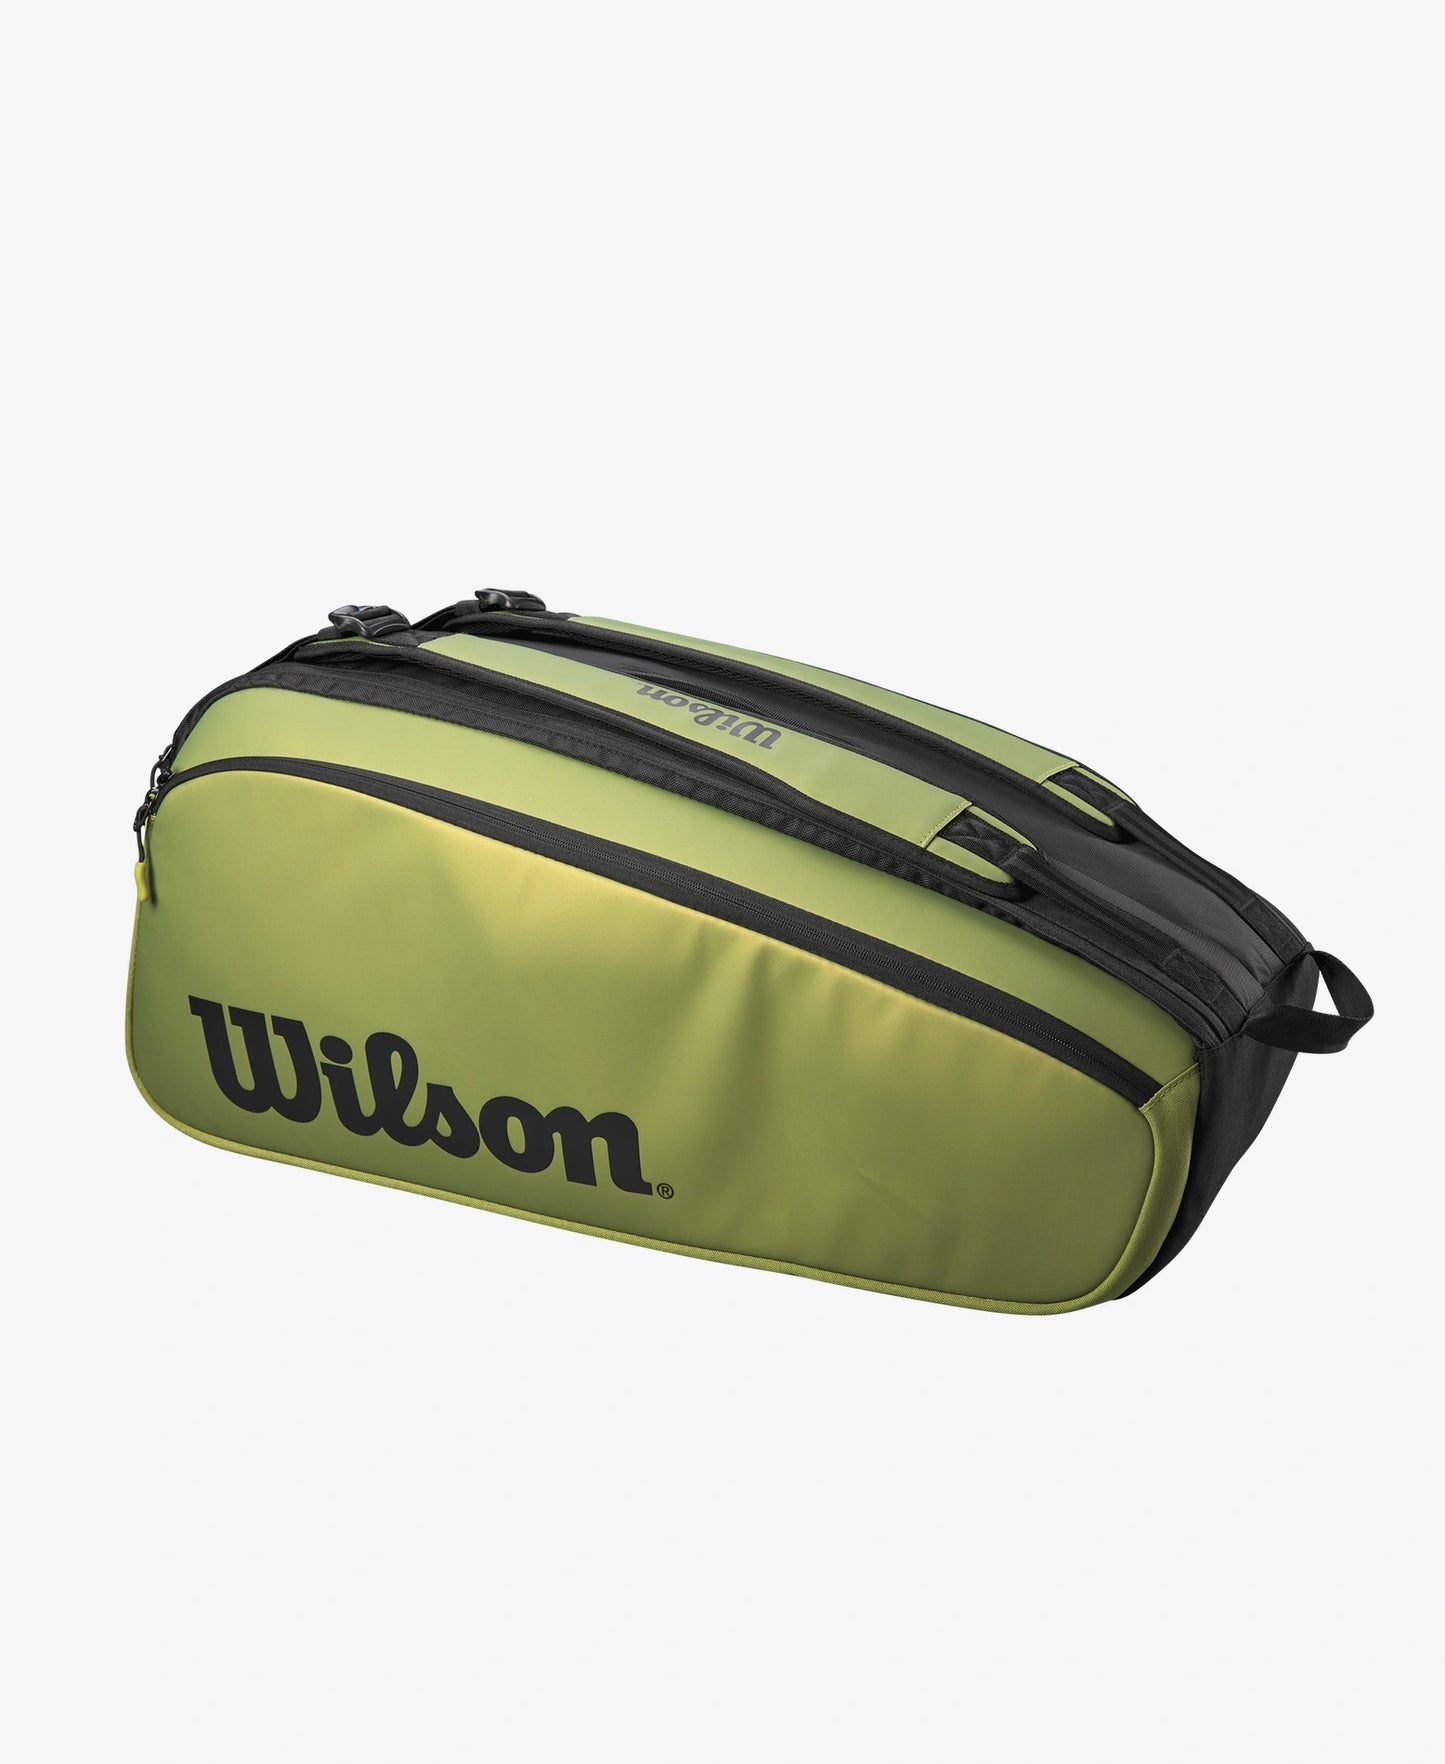 The Wilson Blade V8 Super Tour 9 Pack Racket Bag available for sale at GSM Sports.    